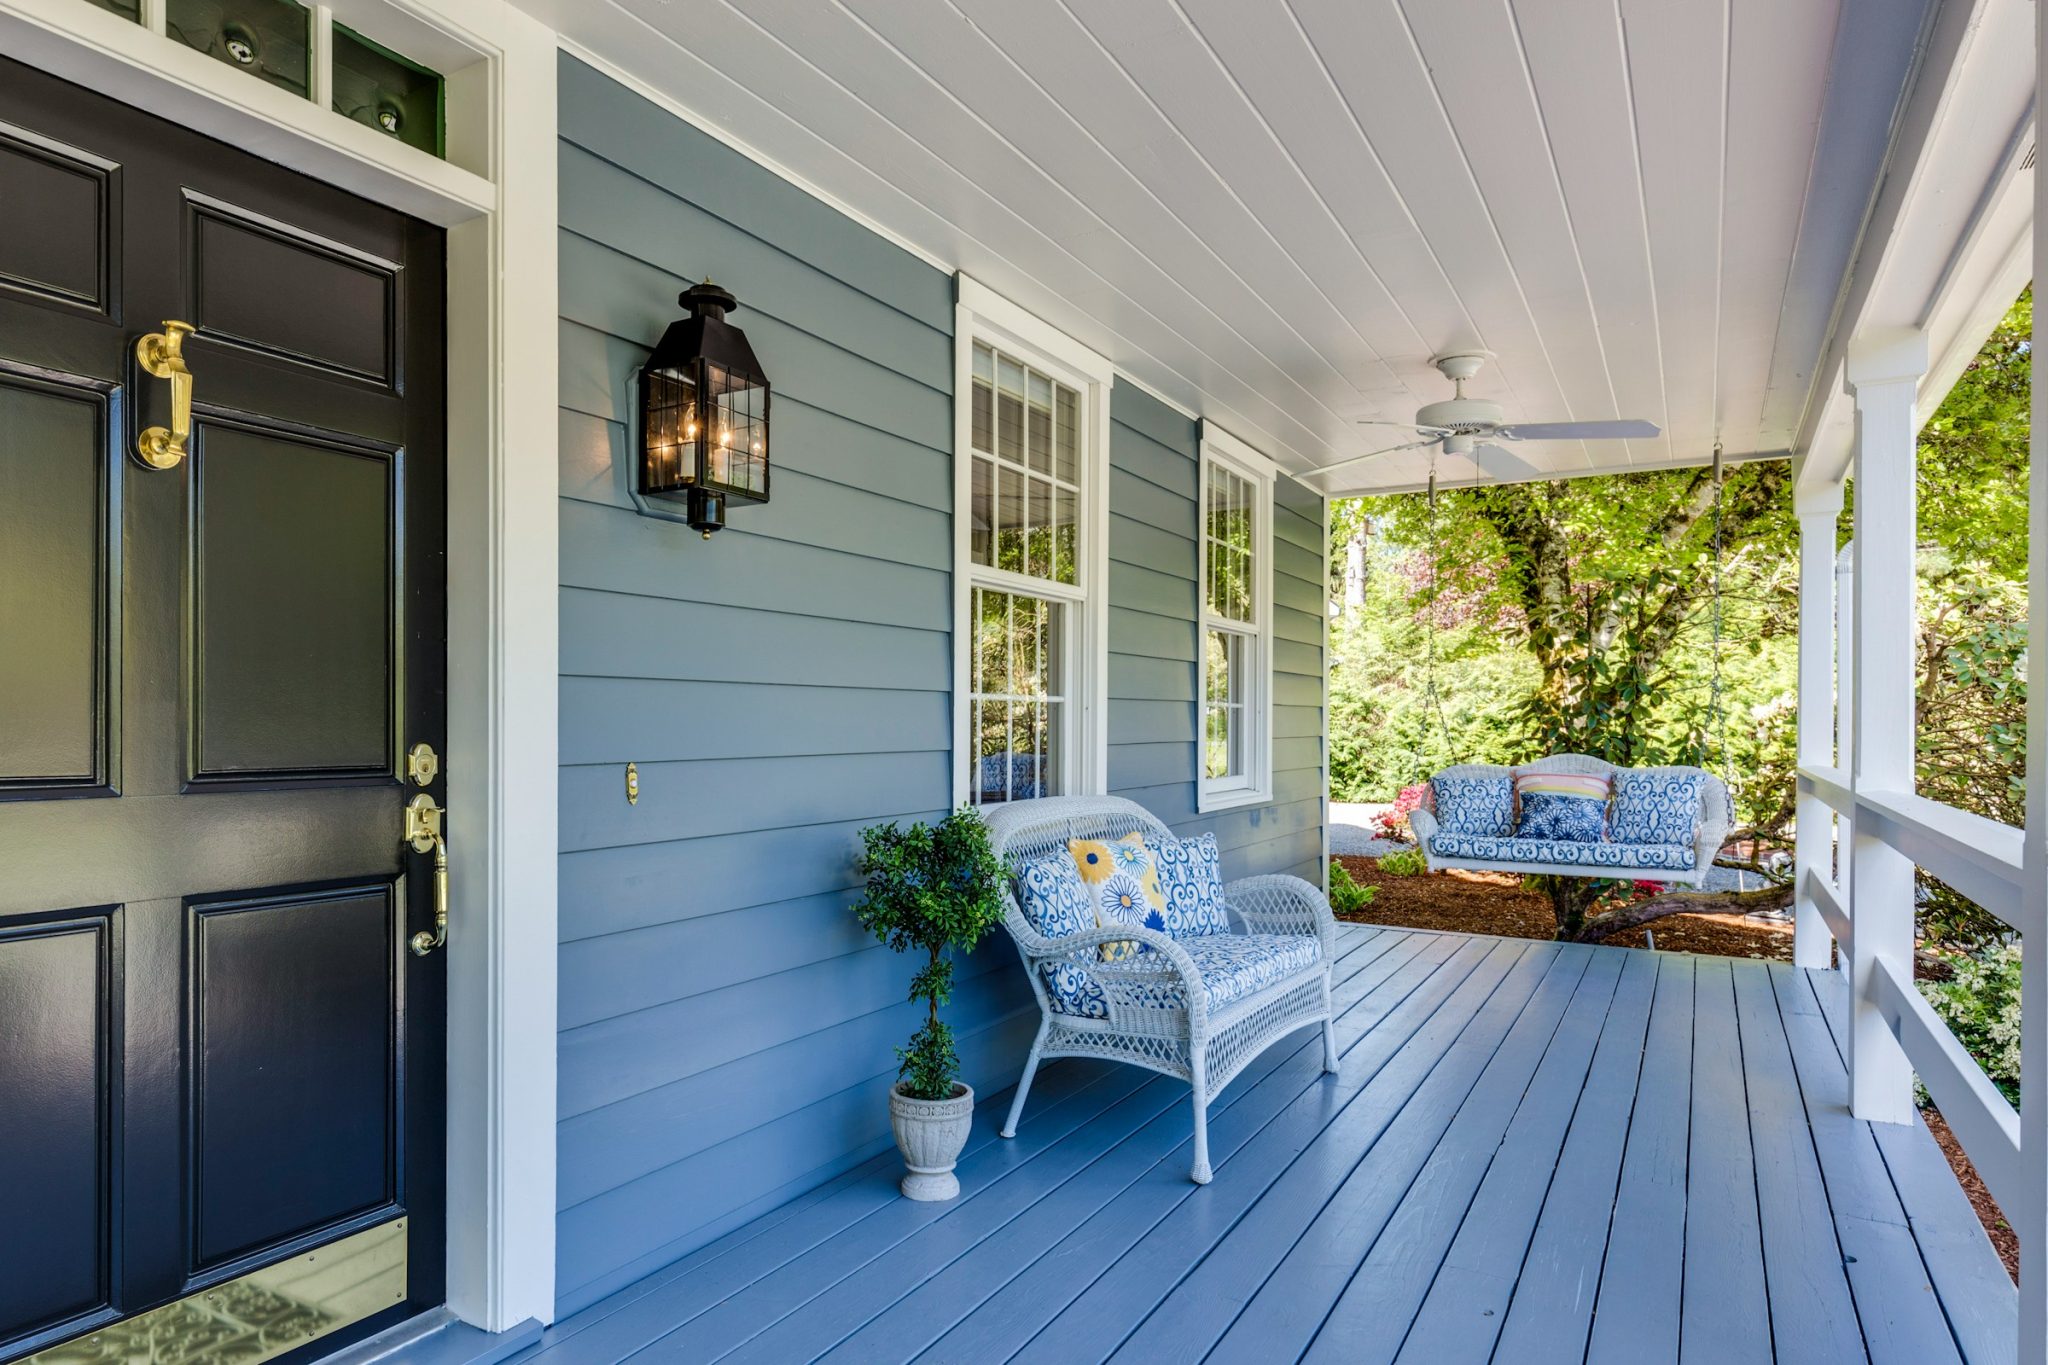 6 tips for revitalizing your home with spring renovations